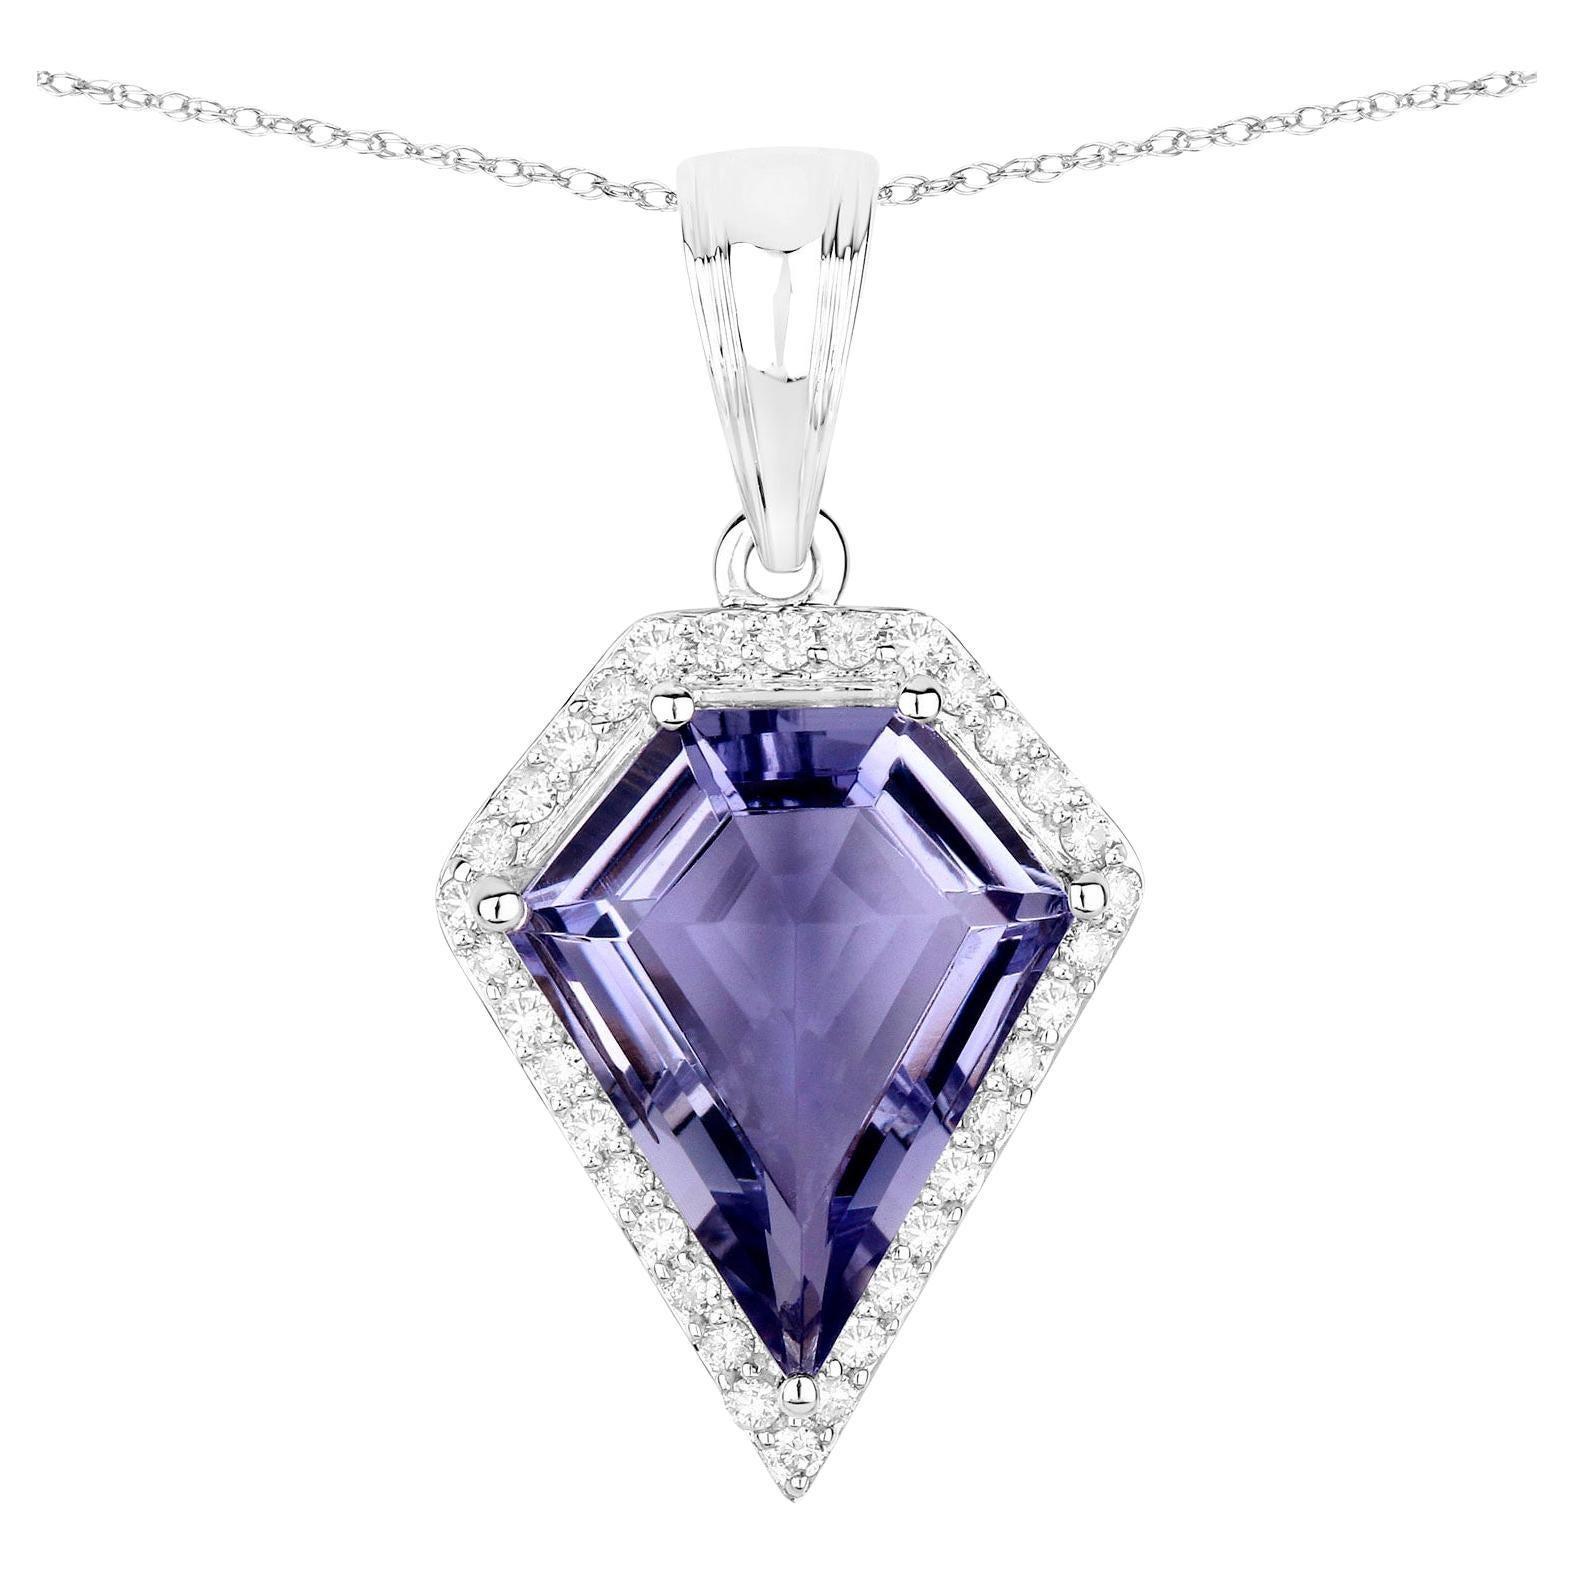 Iolite Pendant Necklace With Diamonds 4.65 Carats 14K White Gold